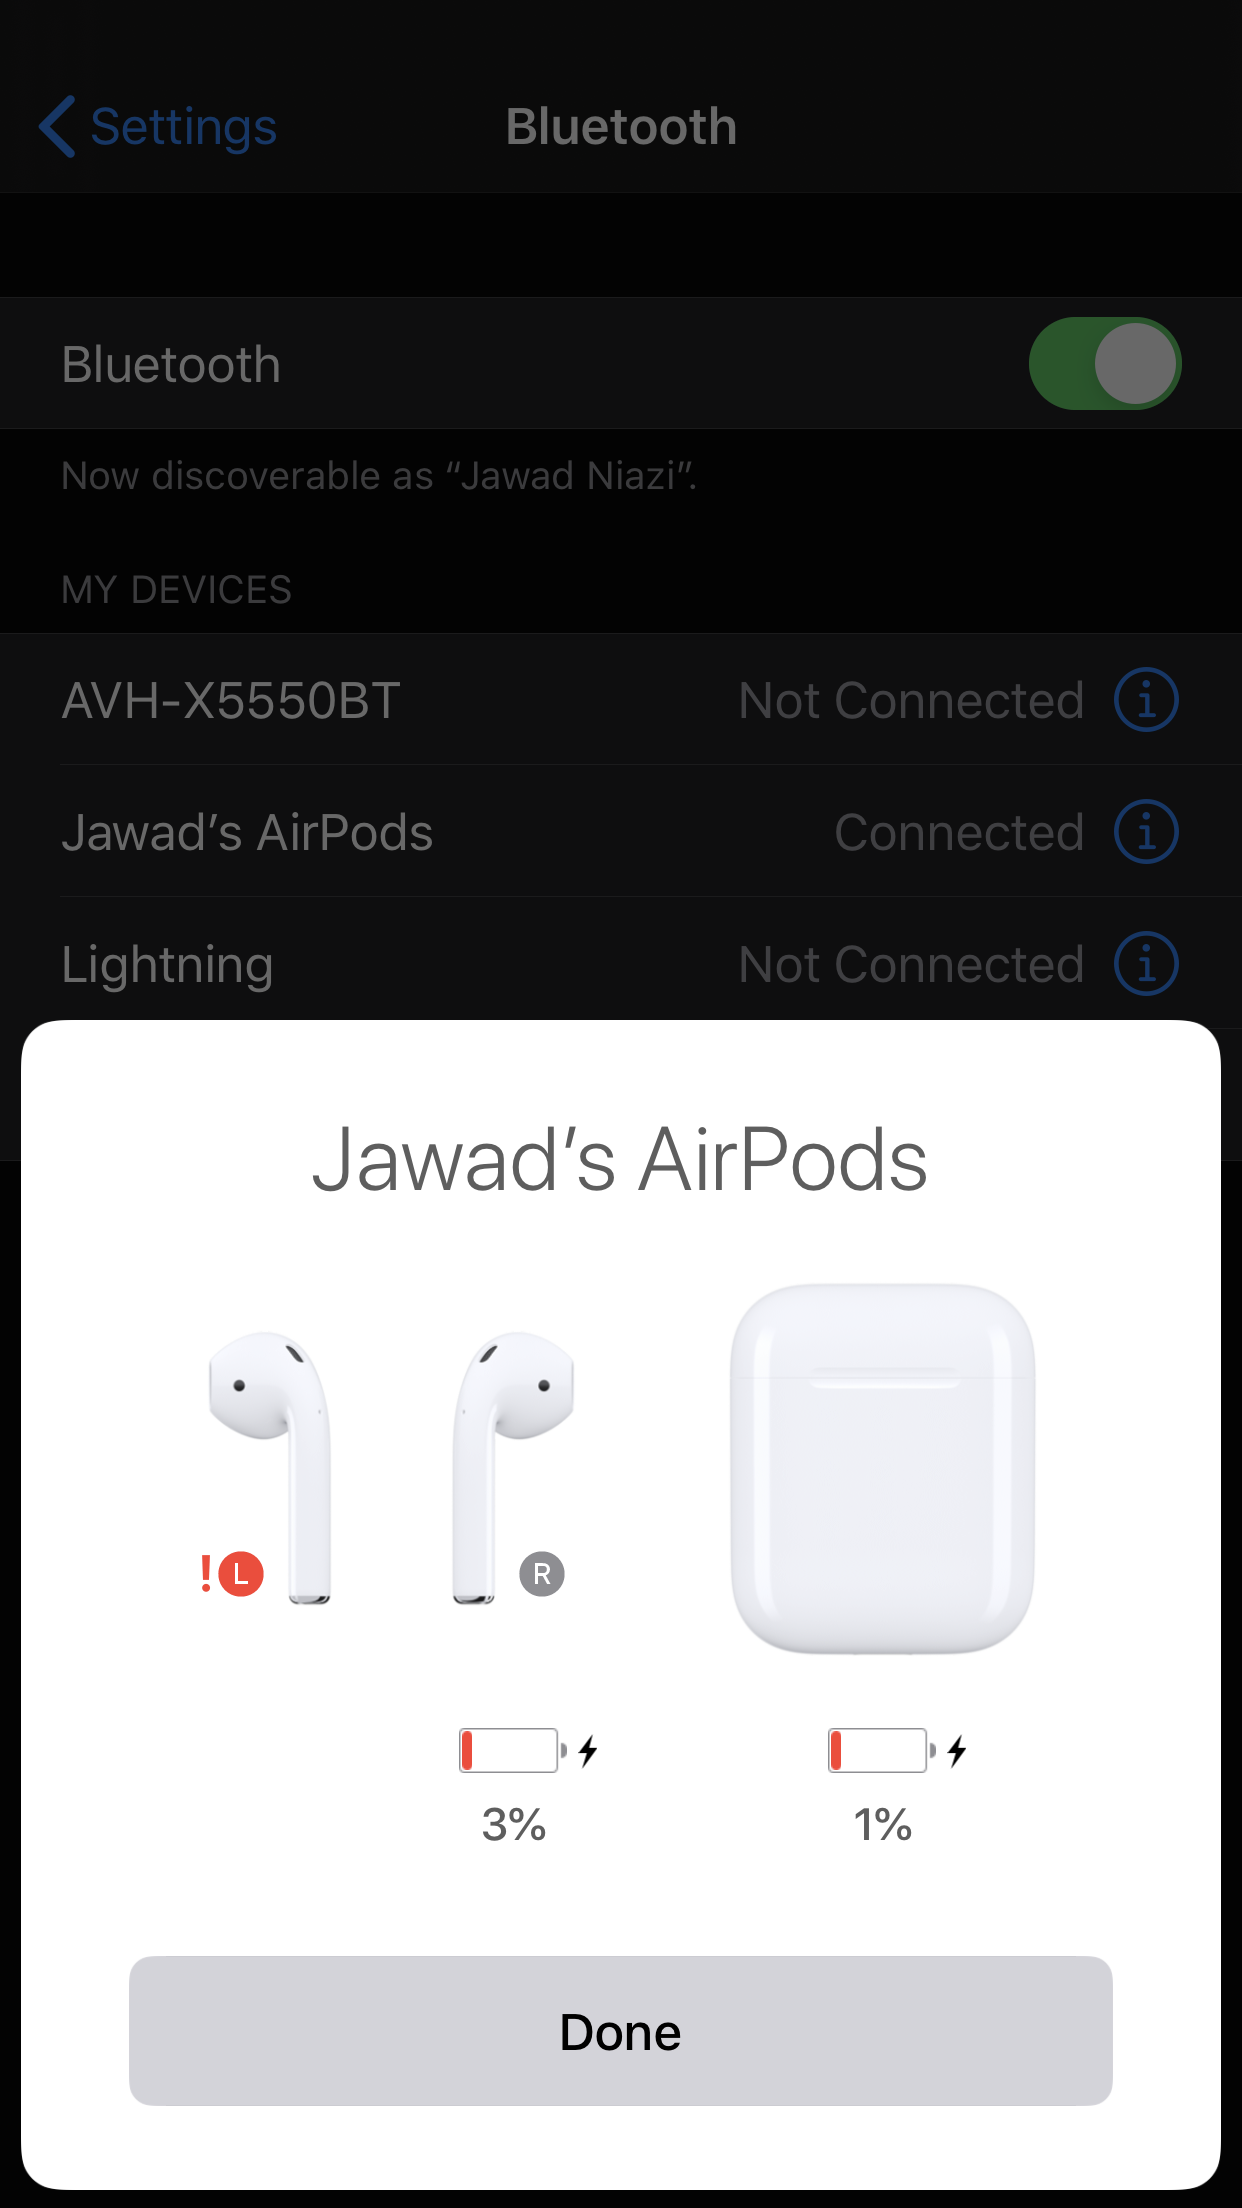 Udvalg Tyr Fjord Left AirPod won't connect. - Apple Community